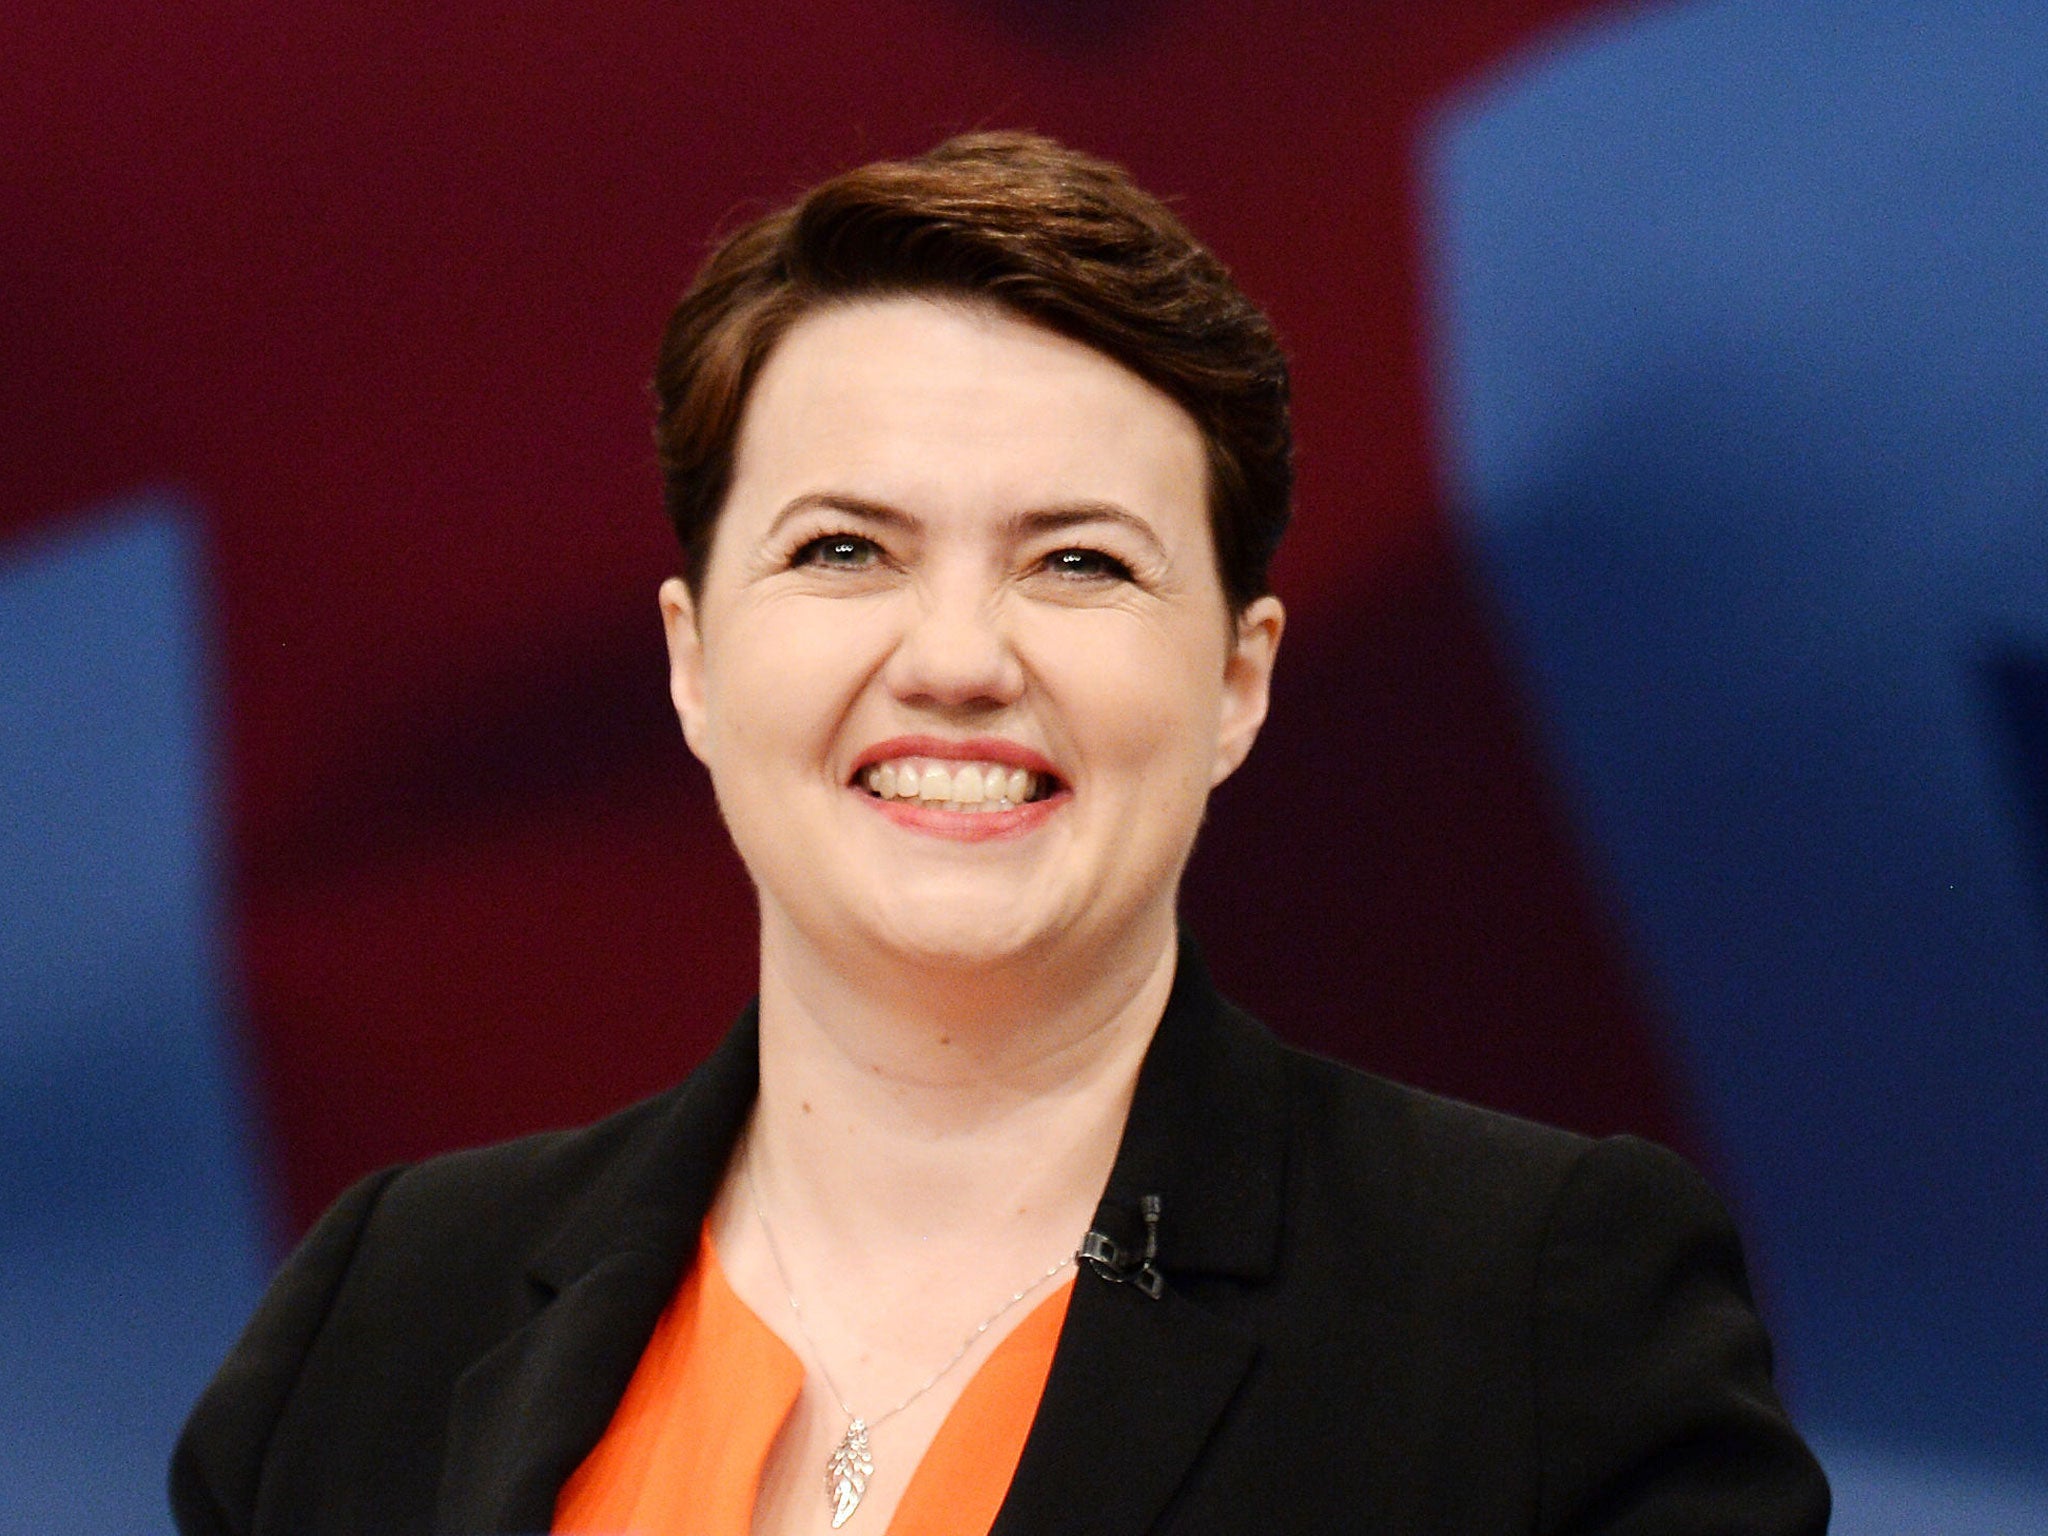 Ruth Davidson is seen as a rising star and possible future Tory leader